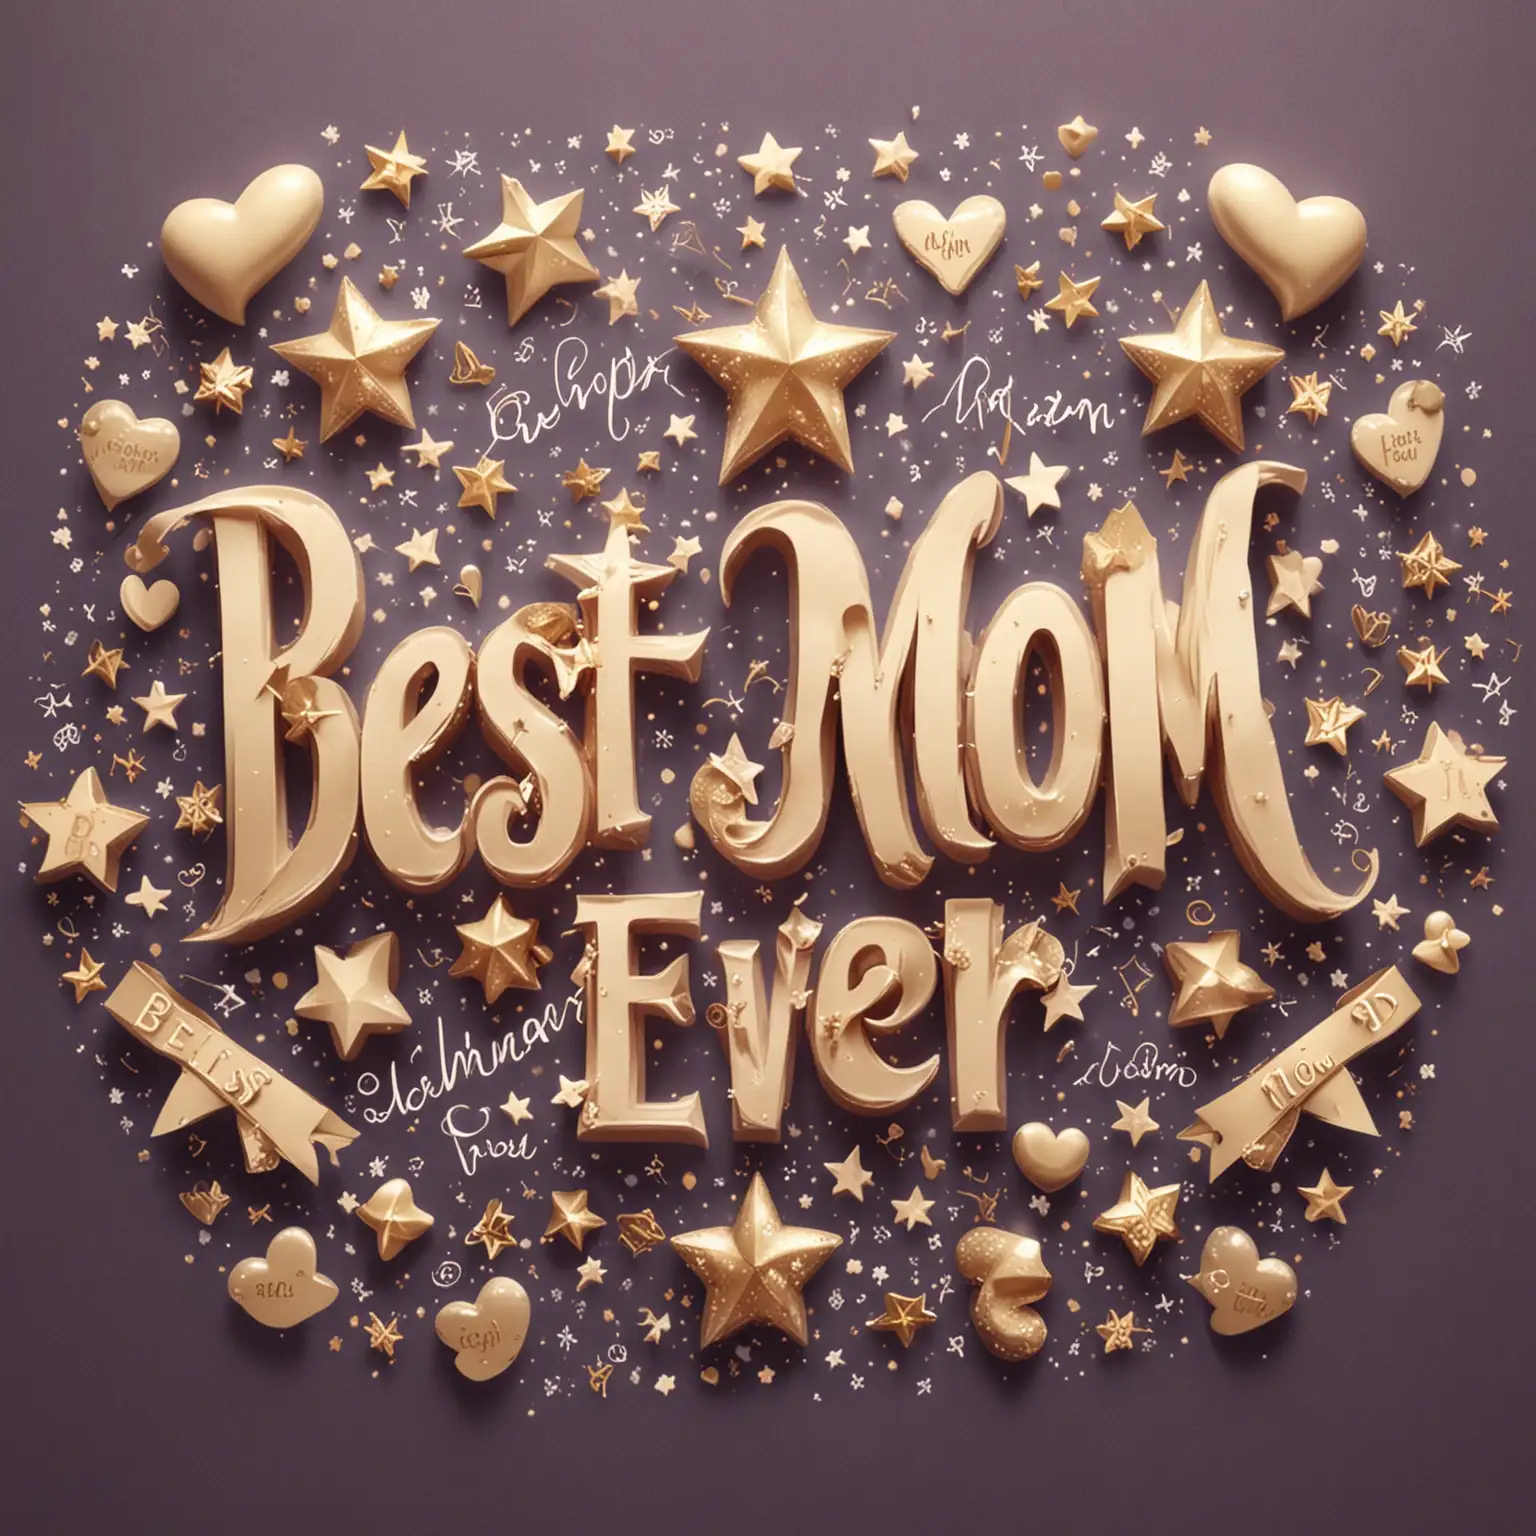 Design an animation where the words "Best Mom Ever" appear one by one in an elegant font, accompanied by subtle decorative elements like hearts or stars.